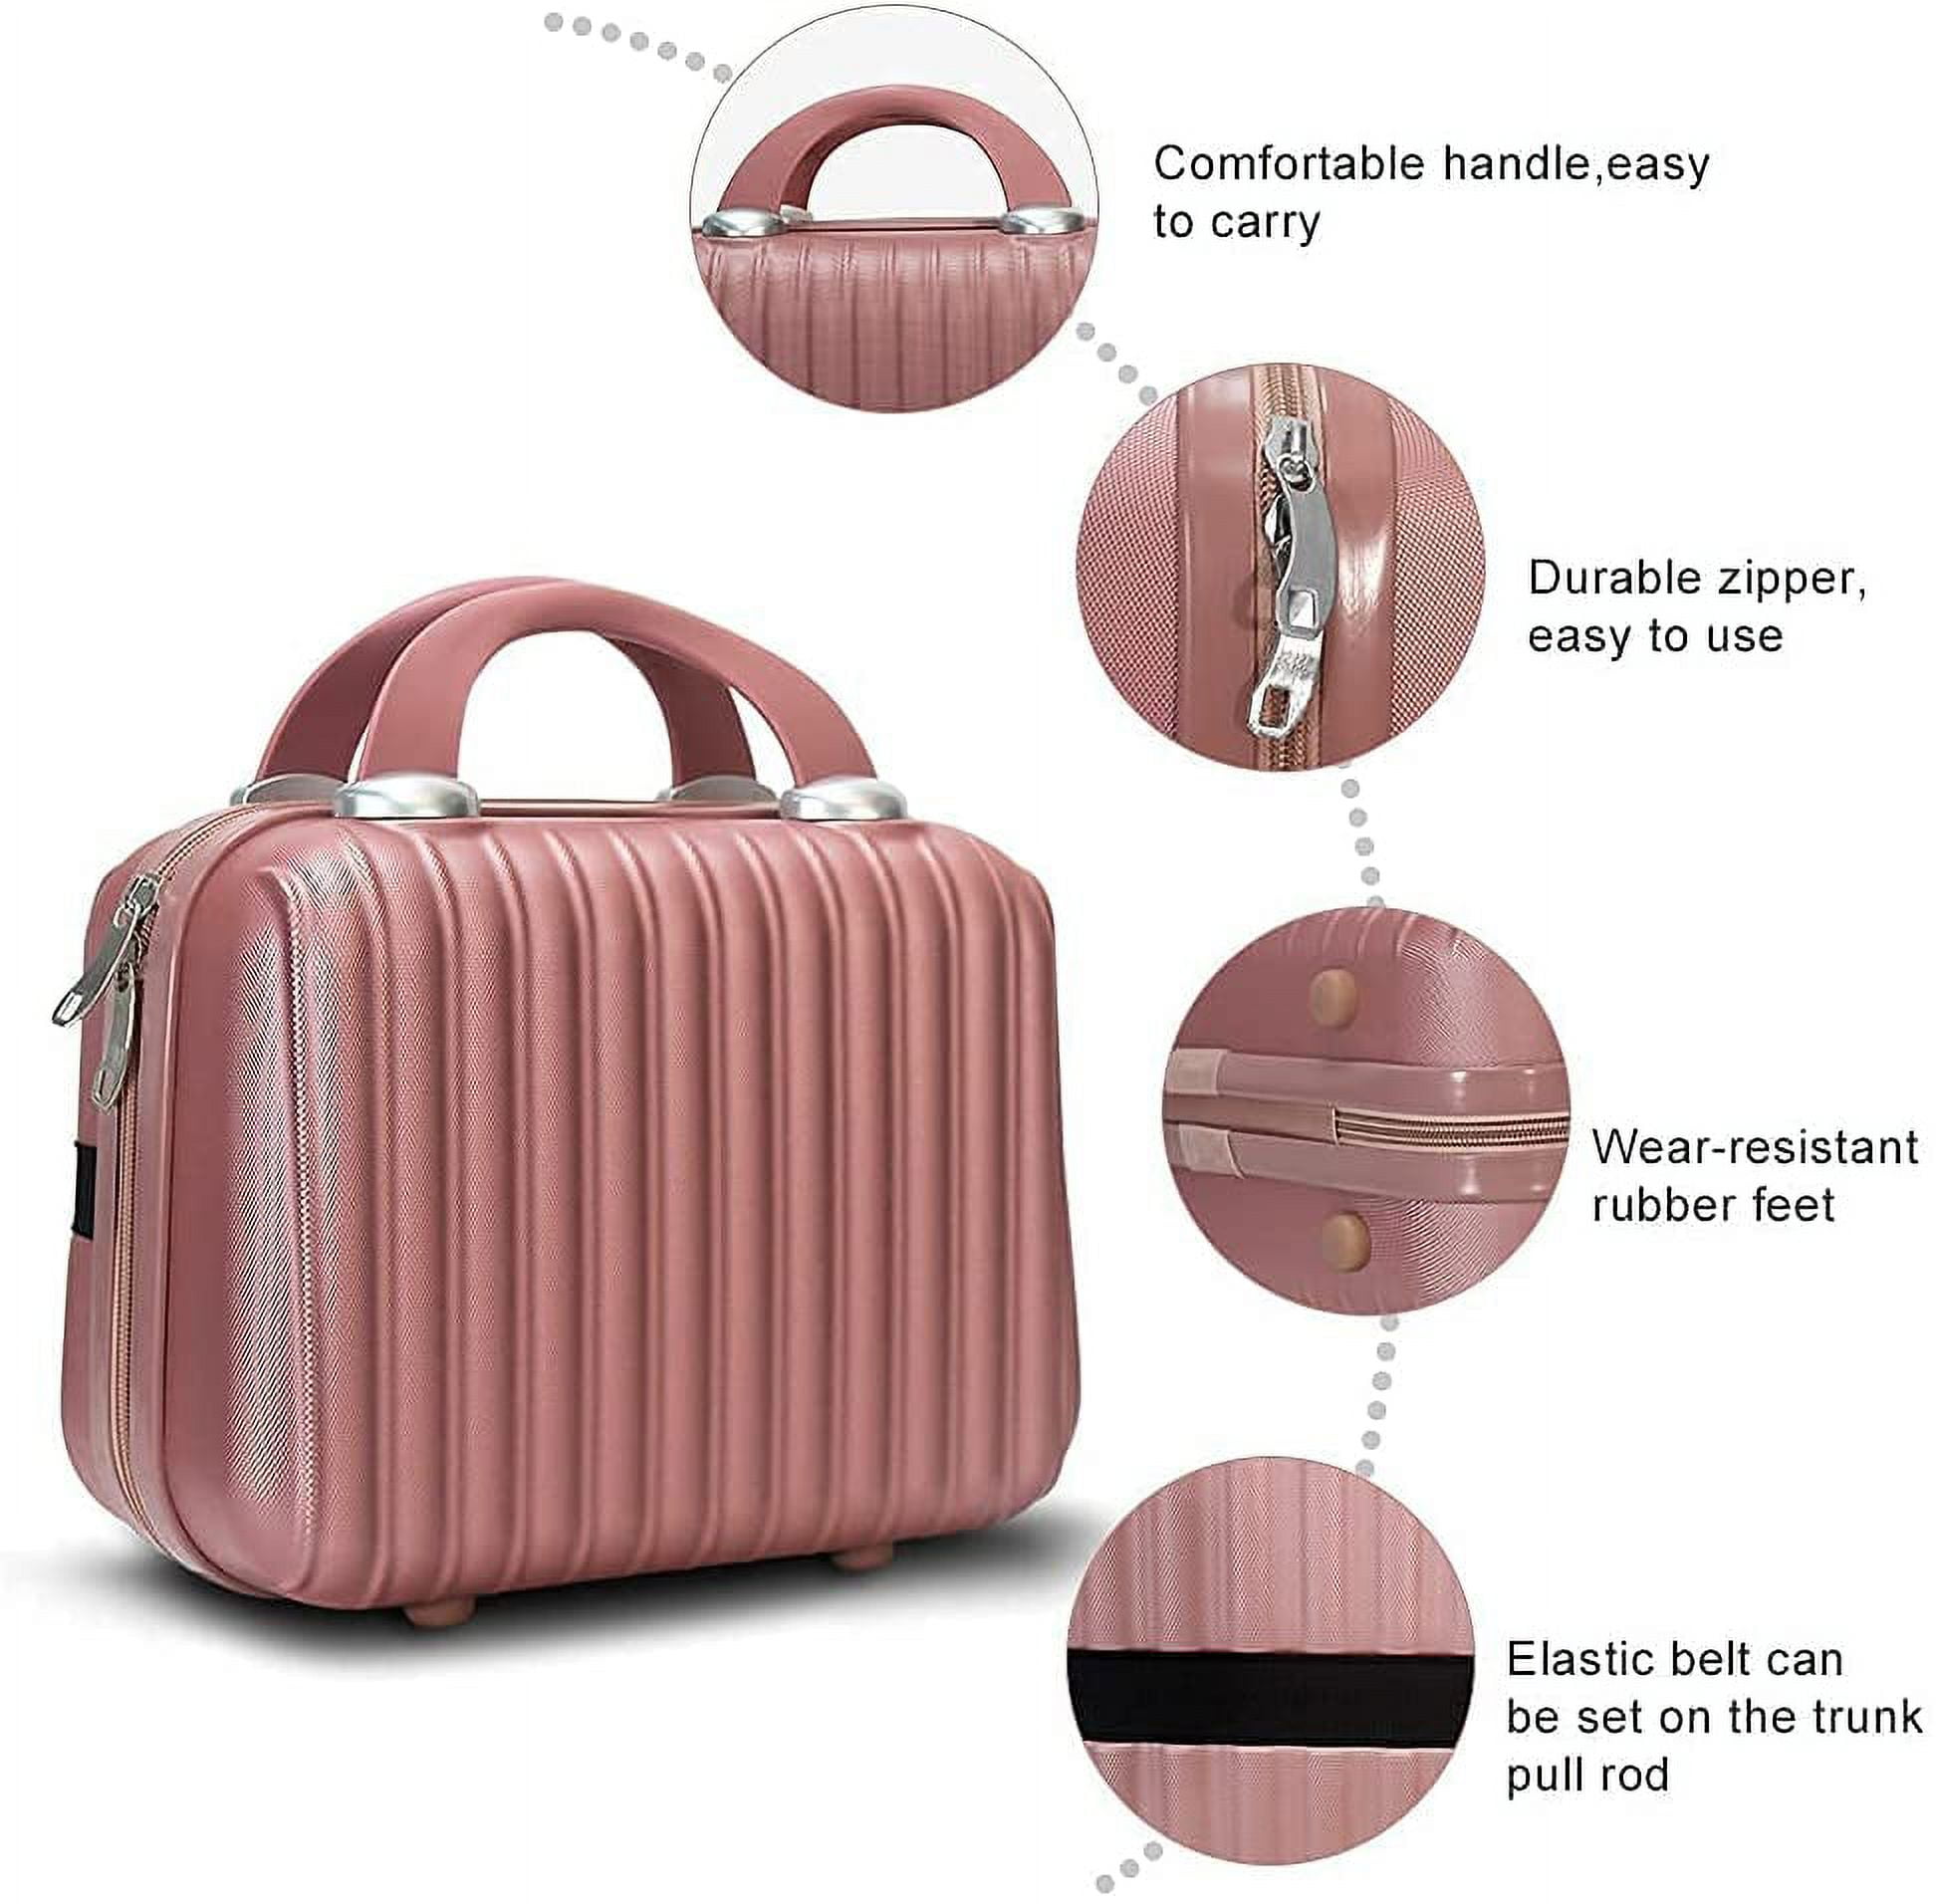  BSTKEY Portable Makeup Travel Case, Hard Shell Cosmetic Case  Hand Luggage Bag Organizer, Mini ABS Carrying Suitcase with Elastic Band,  Rose Gold : Beauty & Personal Care